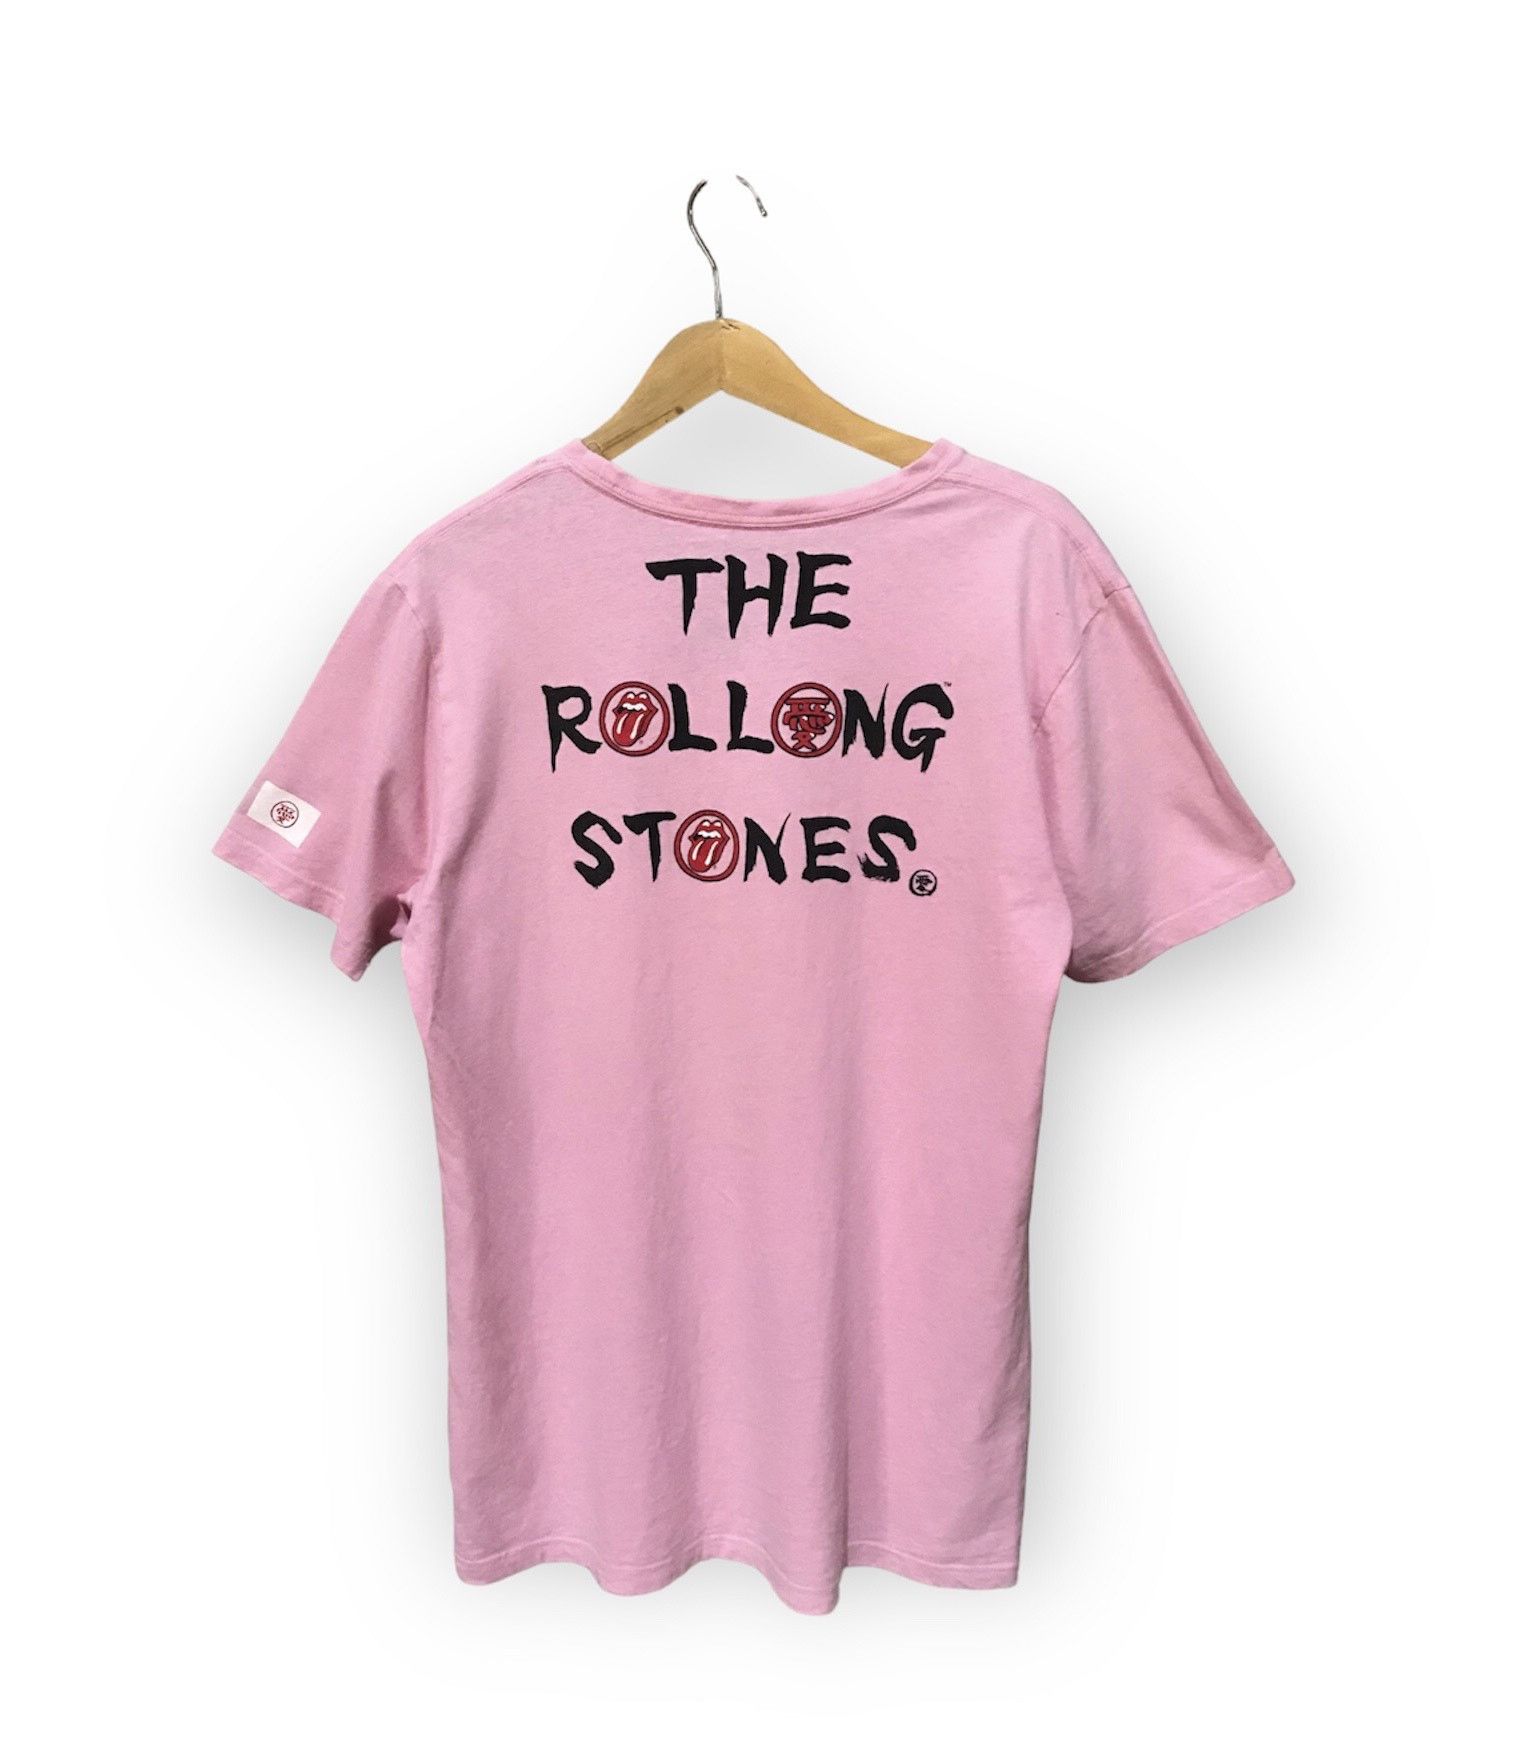 The Rolling Stones Rare The rolling Stones X japanese market pink t shirt Size US L / EU 52-54 / 3 - 2 Preview